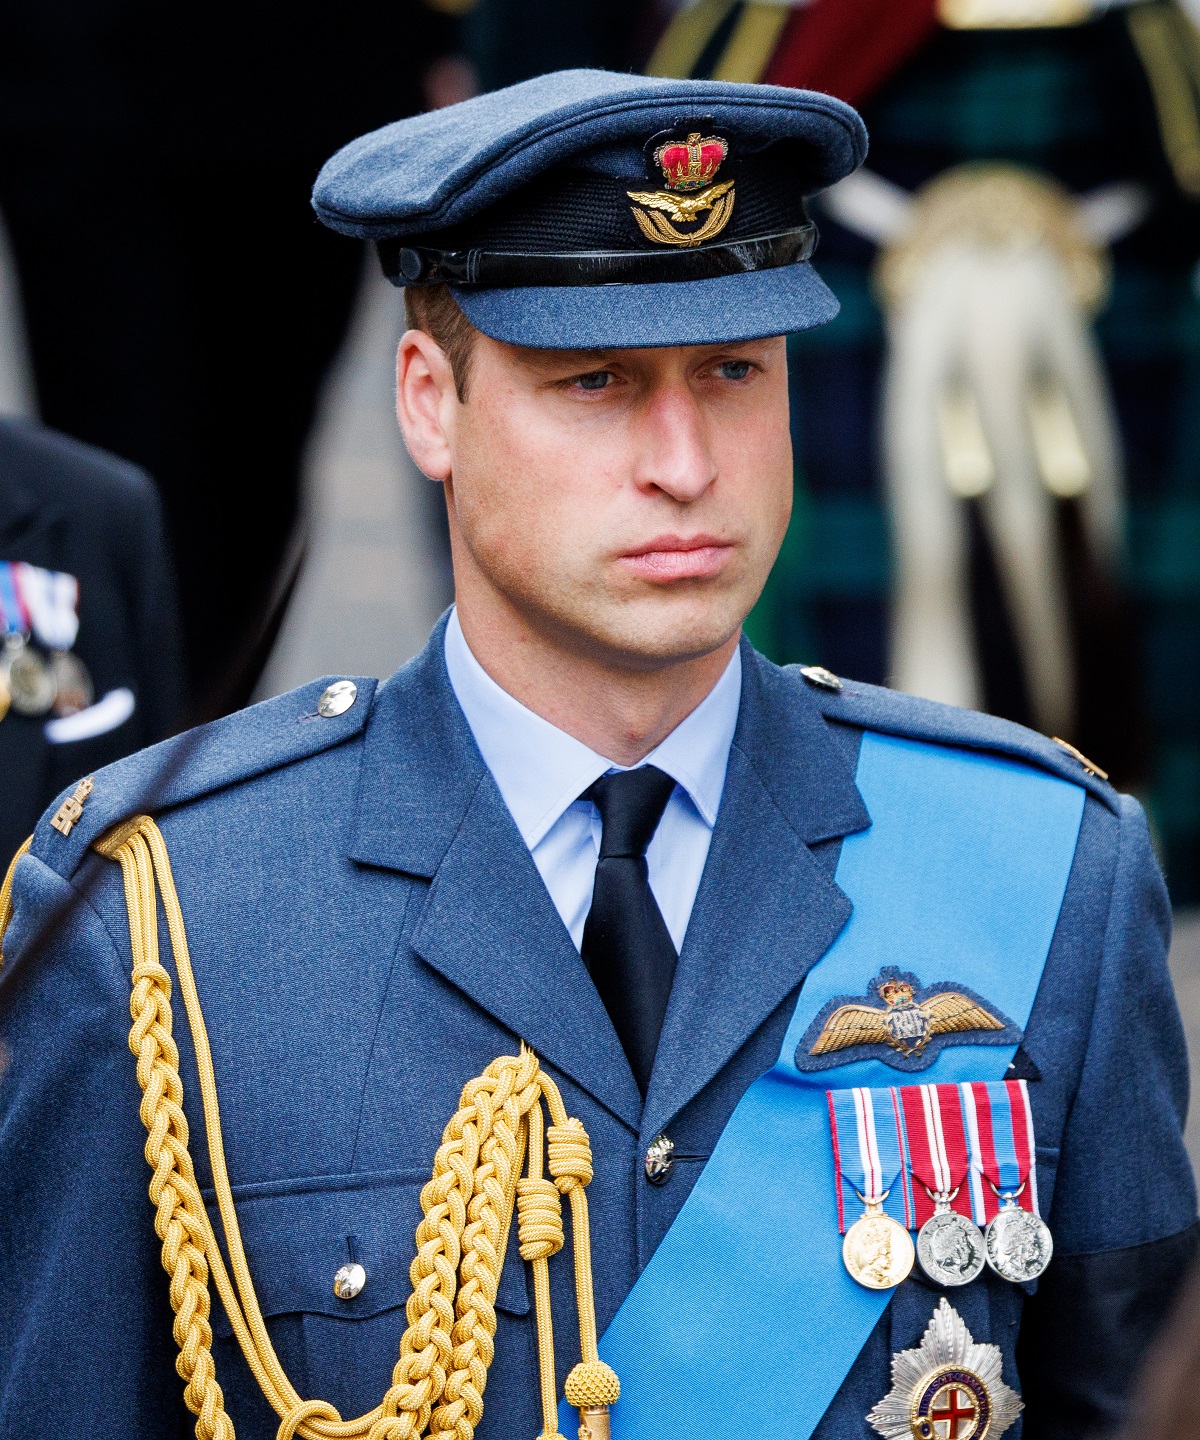 Prince William in uniform during the state funeral of Queen Elizabeth II at Westminster Abbey